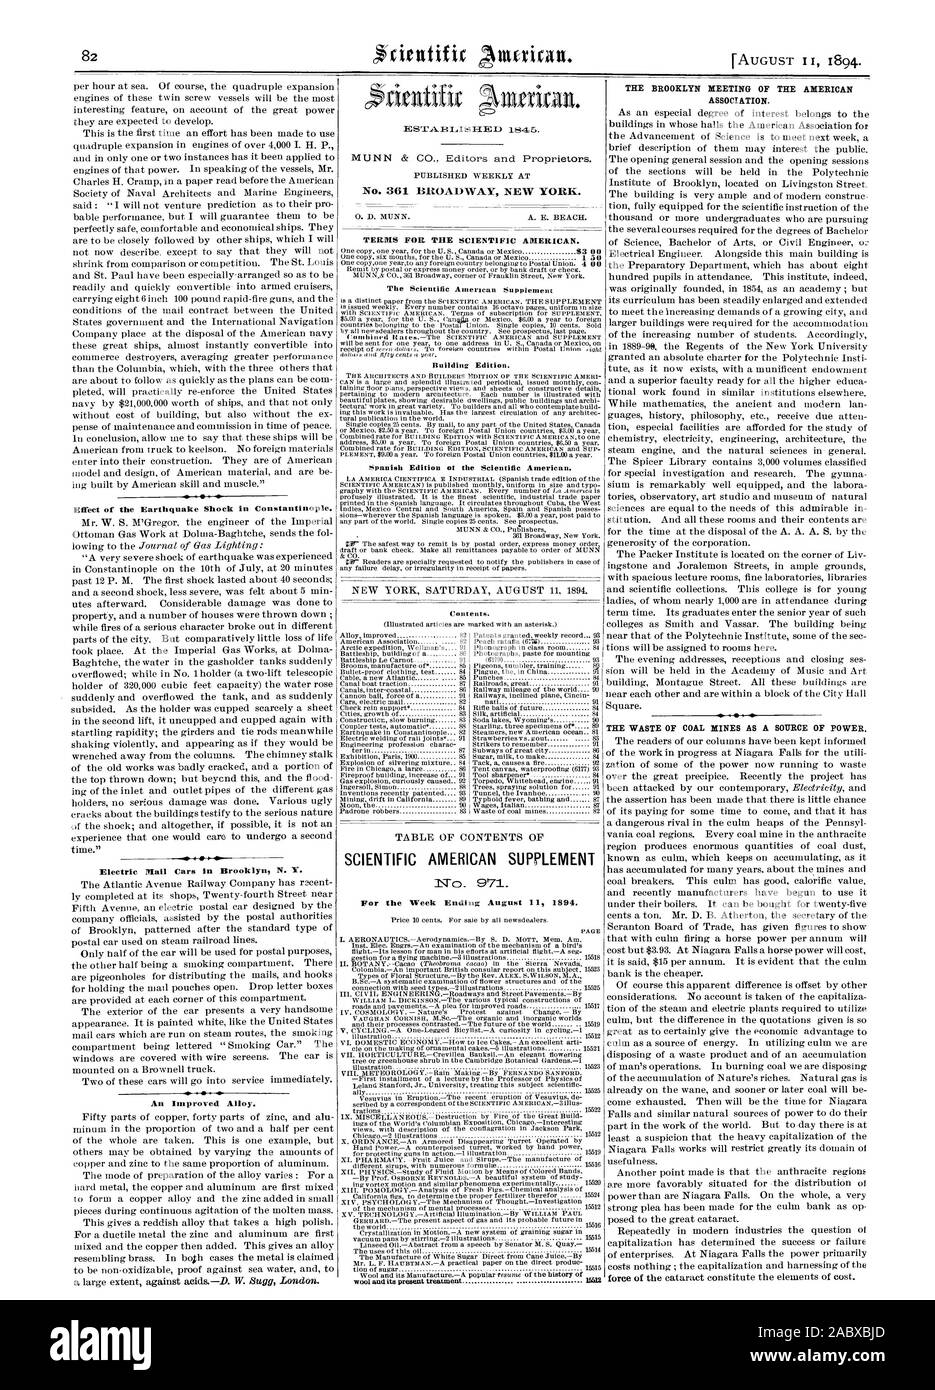 Effect of the Earthquake Shock in Constantinople. Electric Mail Cars in Brooklyn N. Y.  414 An Improved Alloy. TERMS FOR THE SCIENTIFIC AMERICAN. SCIENTIFIC AMERICAN SUPPLEMENT For the Week Ending August  1894. THE BROOKLYN MEETING OF THE AMERICAN ASSOCIATION. THE WASTE OF COAL MINES AS A SOURCE OF POWER., 1894-08-11 Stock Photo